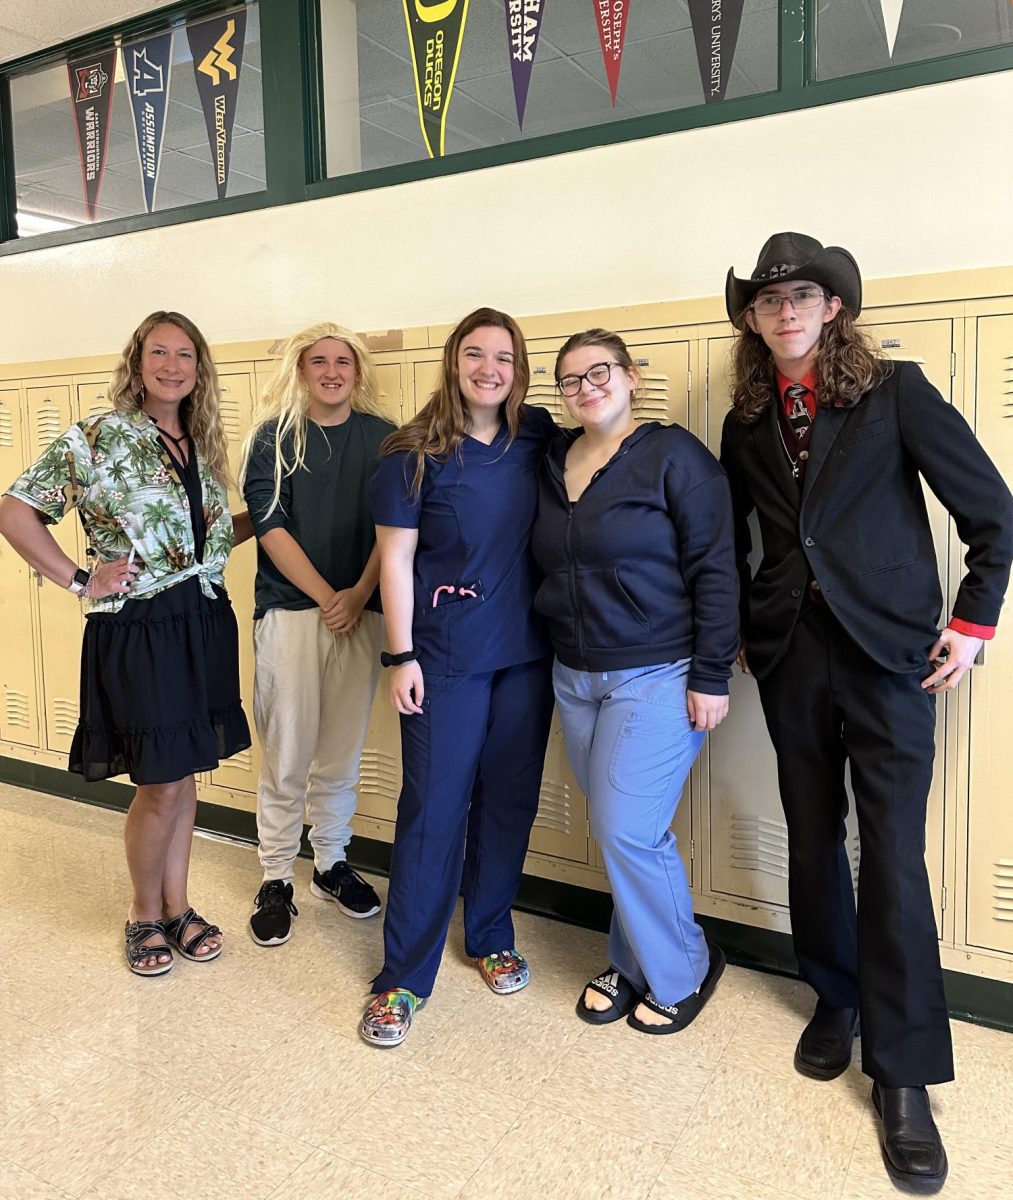 (Left to Right) Mrs. Disbrow, Gavin Russell, Emma Hall, Almira Jusufovic, George Aitchison pose for together for Periscope. From Mrs. Disbrows anticipated retirement to Emma and Almiras medical dreams to Georges business ambitions and Gavins luscious locks- theyre representing the versatility of the futures at CHS!